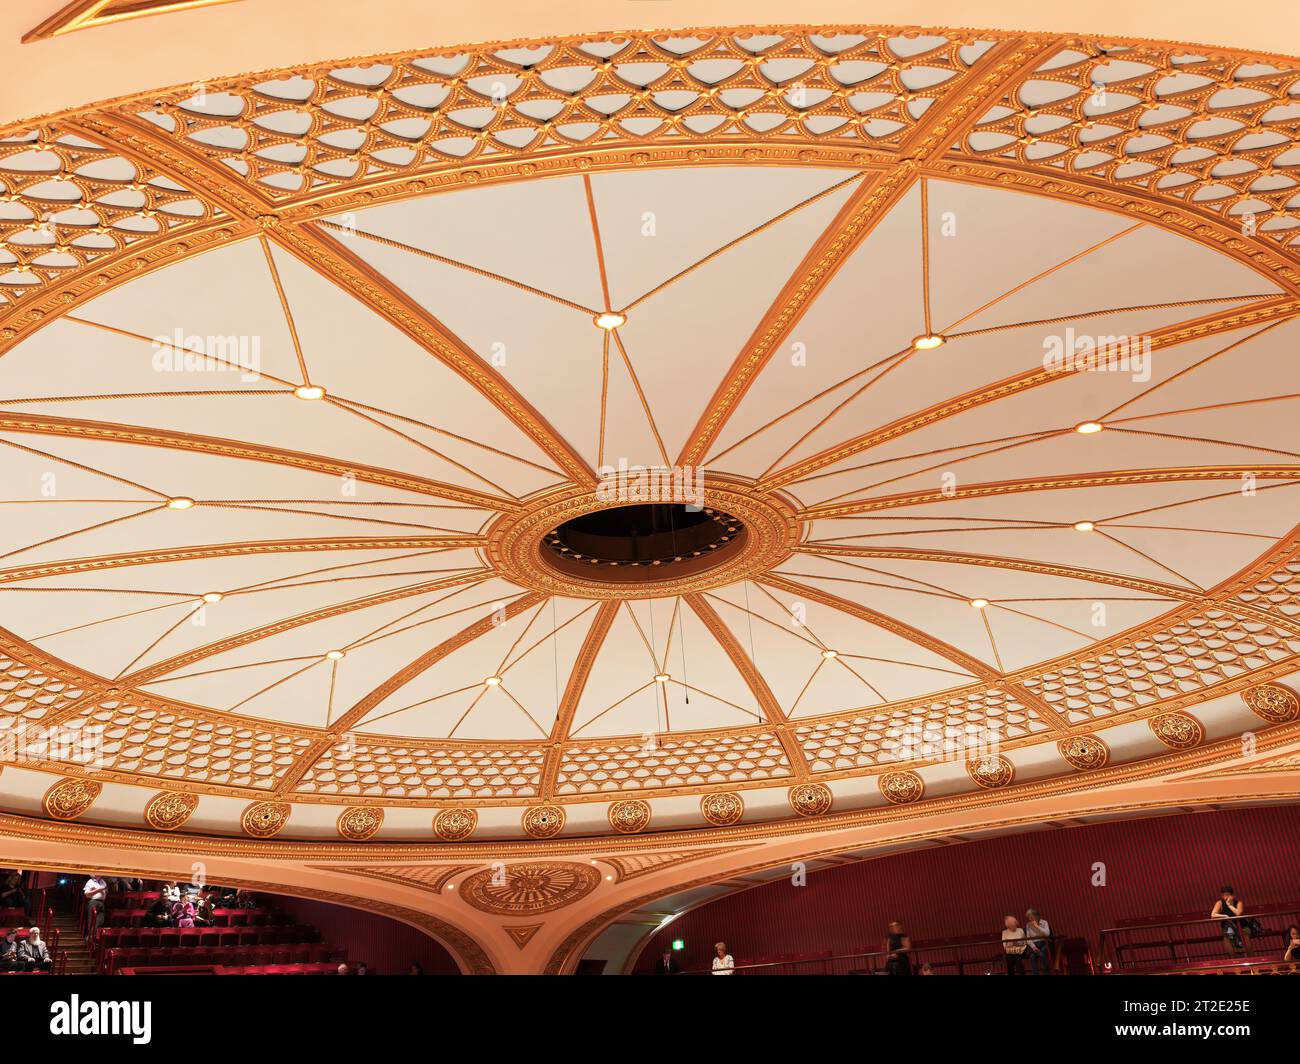 Decorated ceiling in the Royal Opera House, London, England. Stock Photo